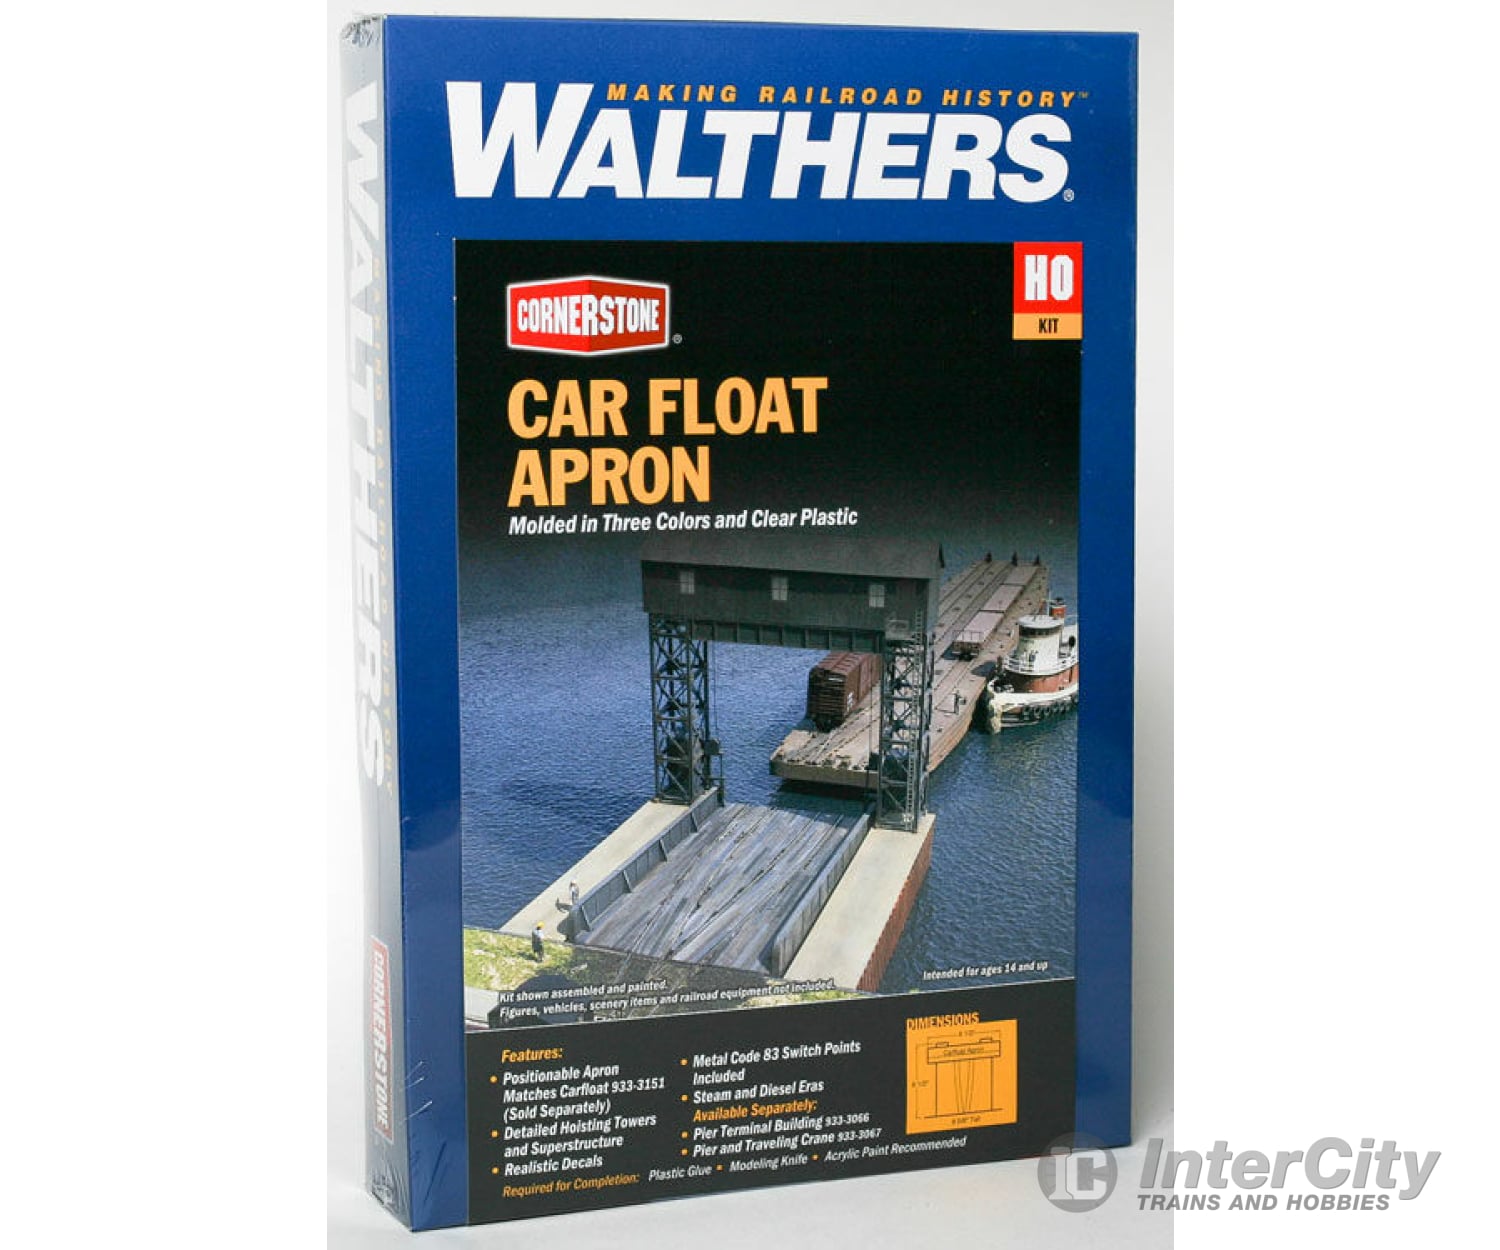 Walthers Cornerstone Ho 3068 Carfloat Apron -- Kit - 8-1/2 X 8-5/8 21.2 21.6Cm (Height Above Water)